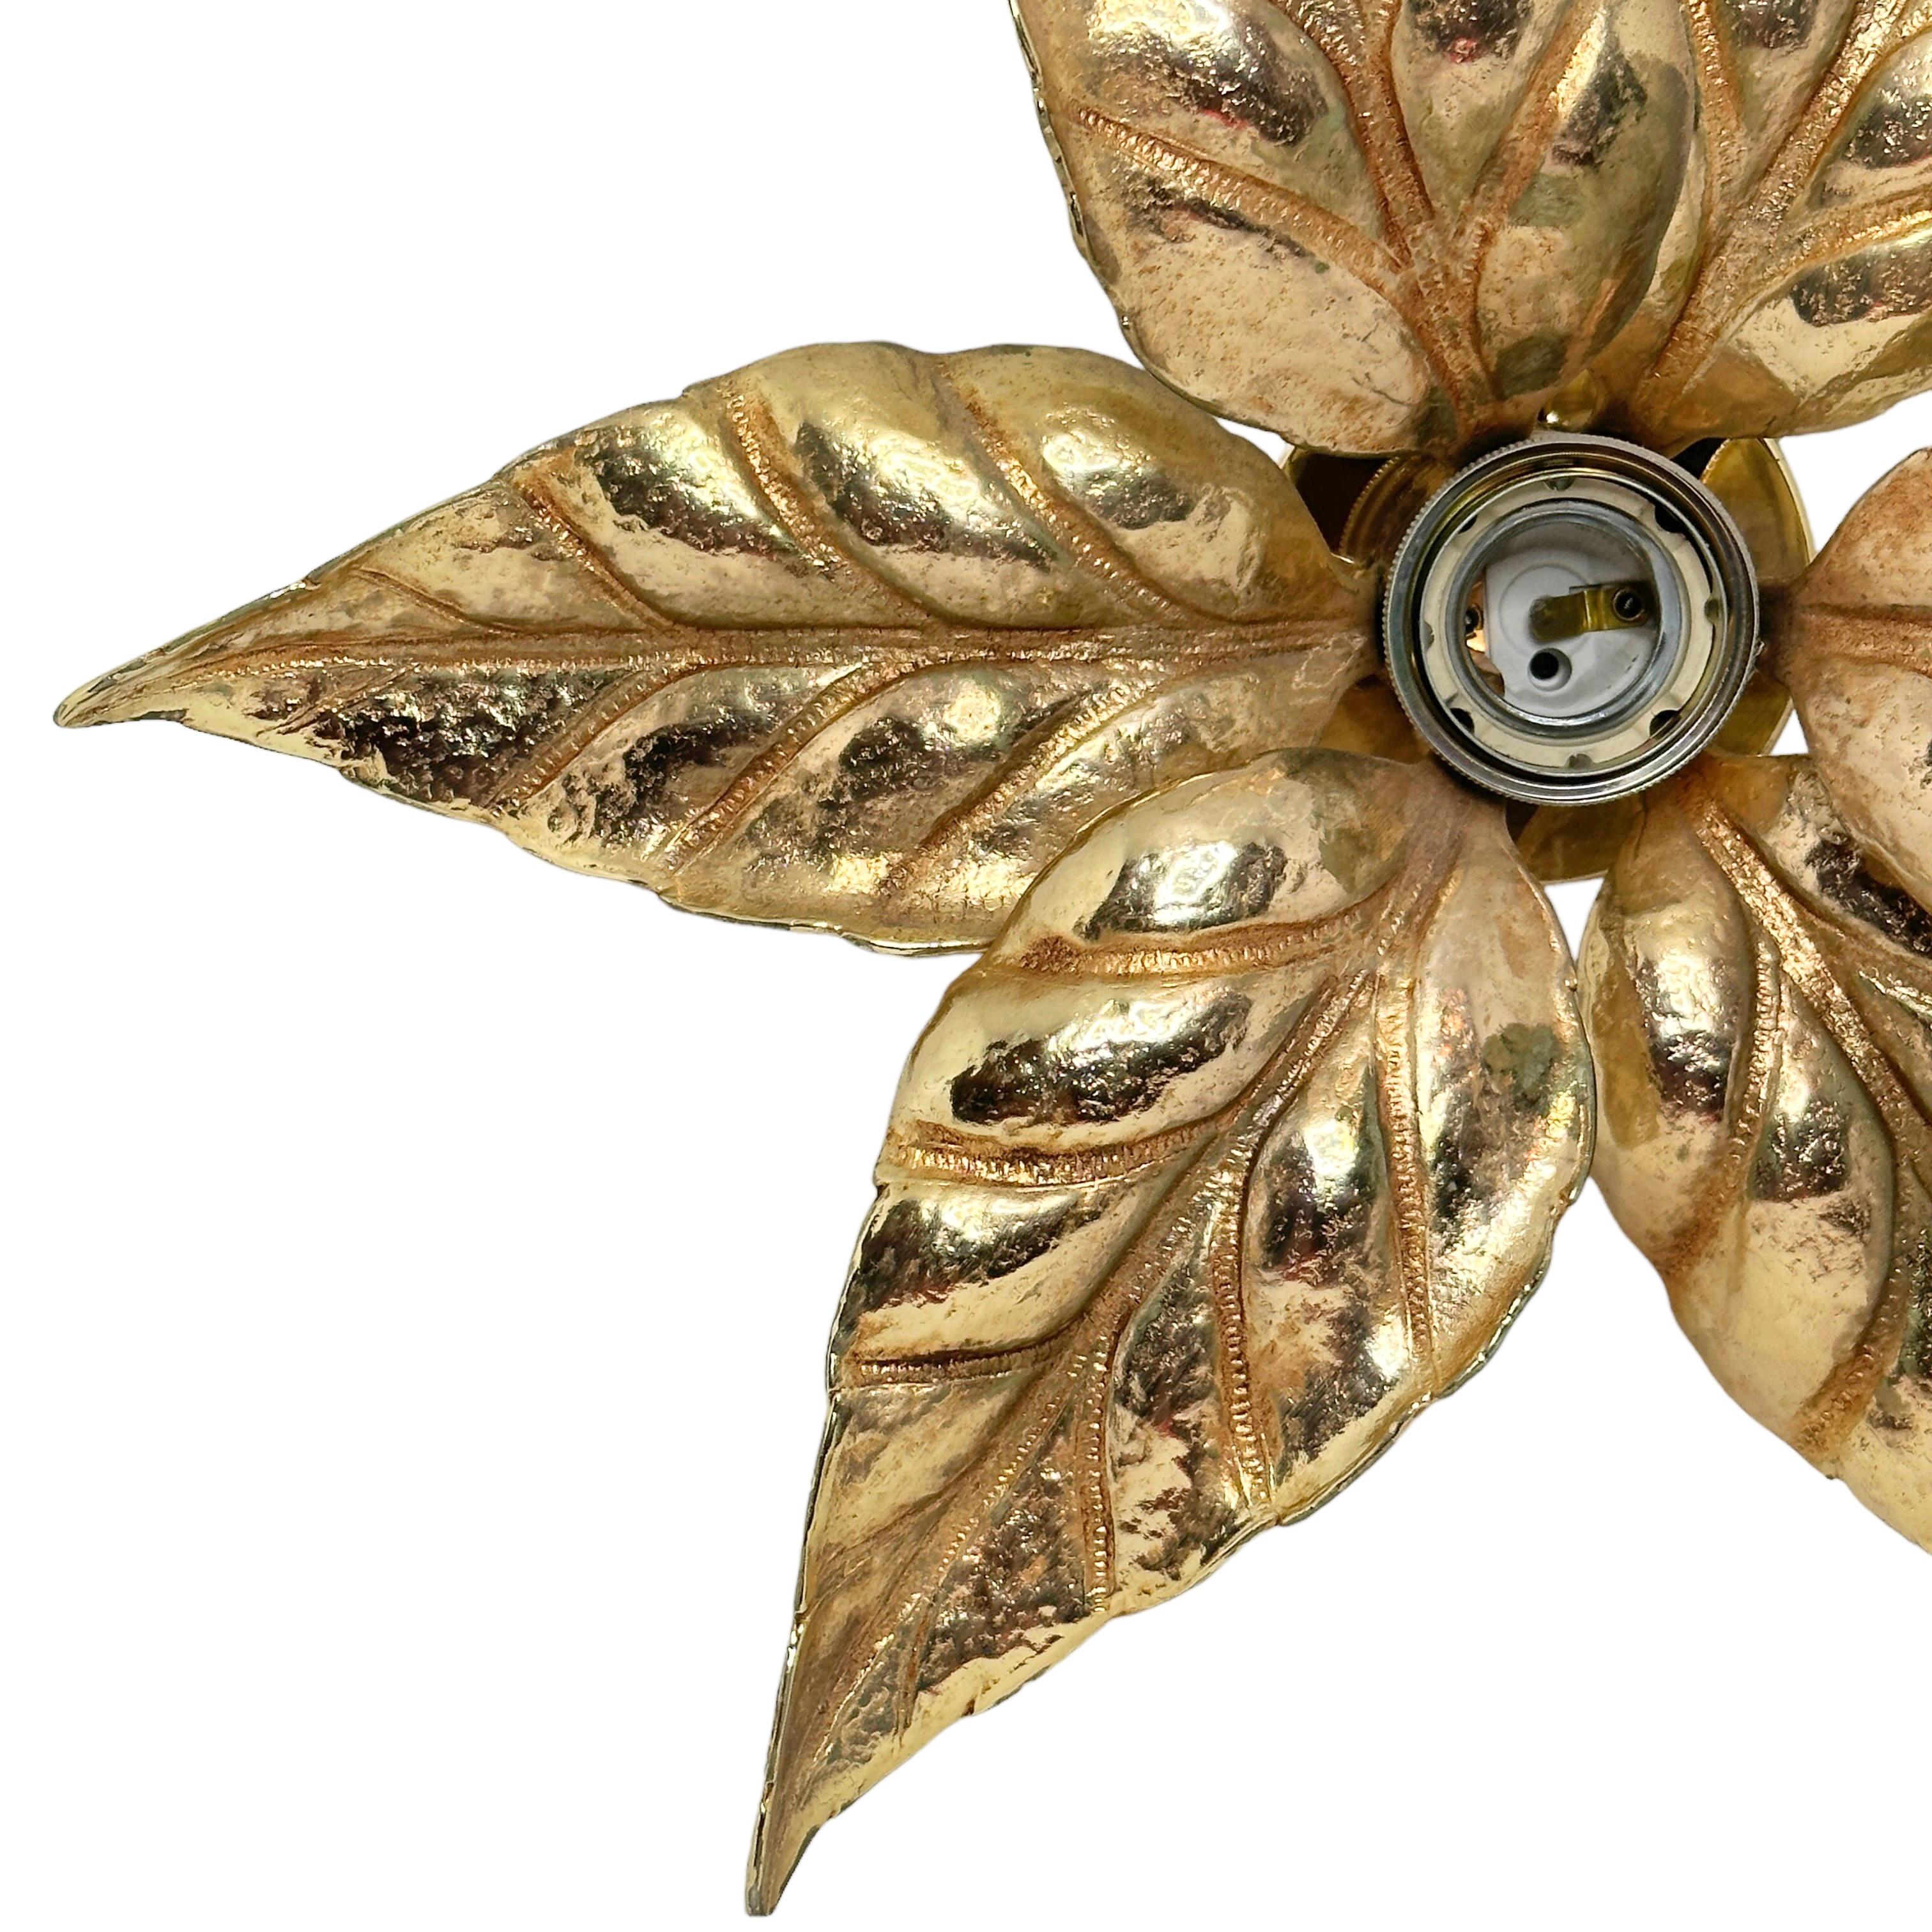 Elegant Willy Daro flower light for ‘Massive Lighting', 1970s. Cast brass flower wall or ceiling light, the light attaches by a plate so can be used either way. The light is wired and in full working order, but as with all our lighting we would